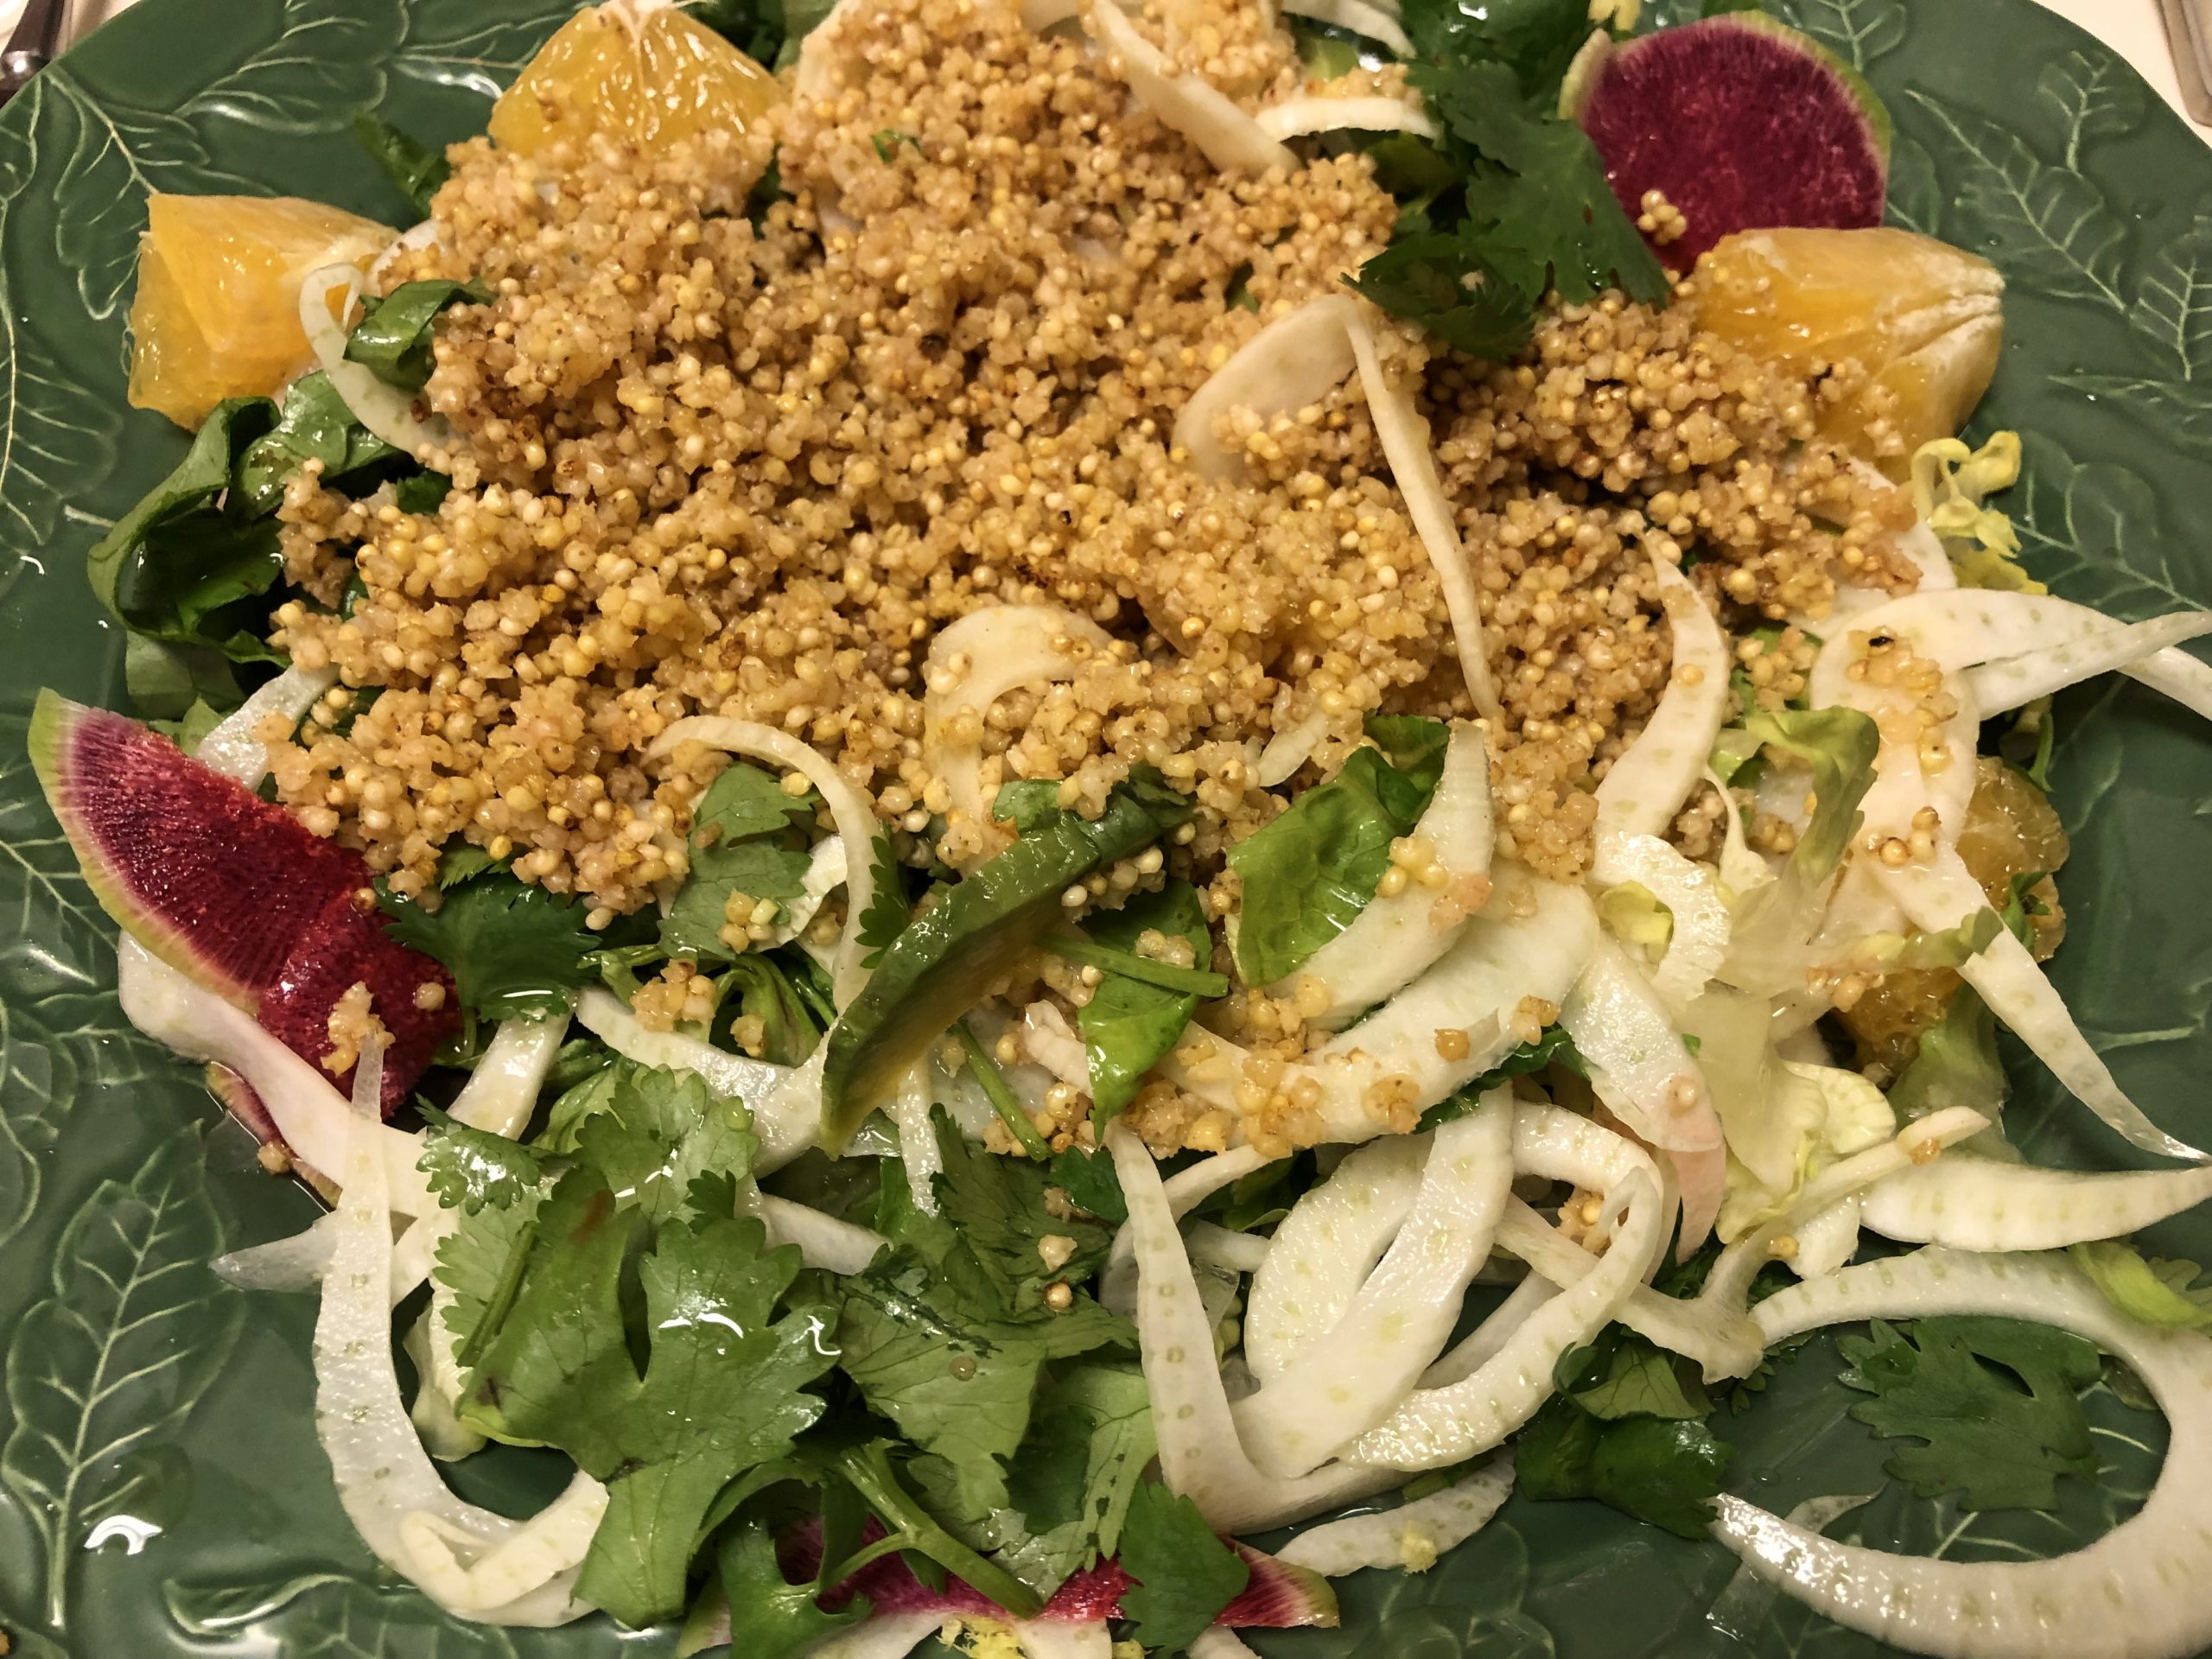 Salad with Millet